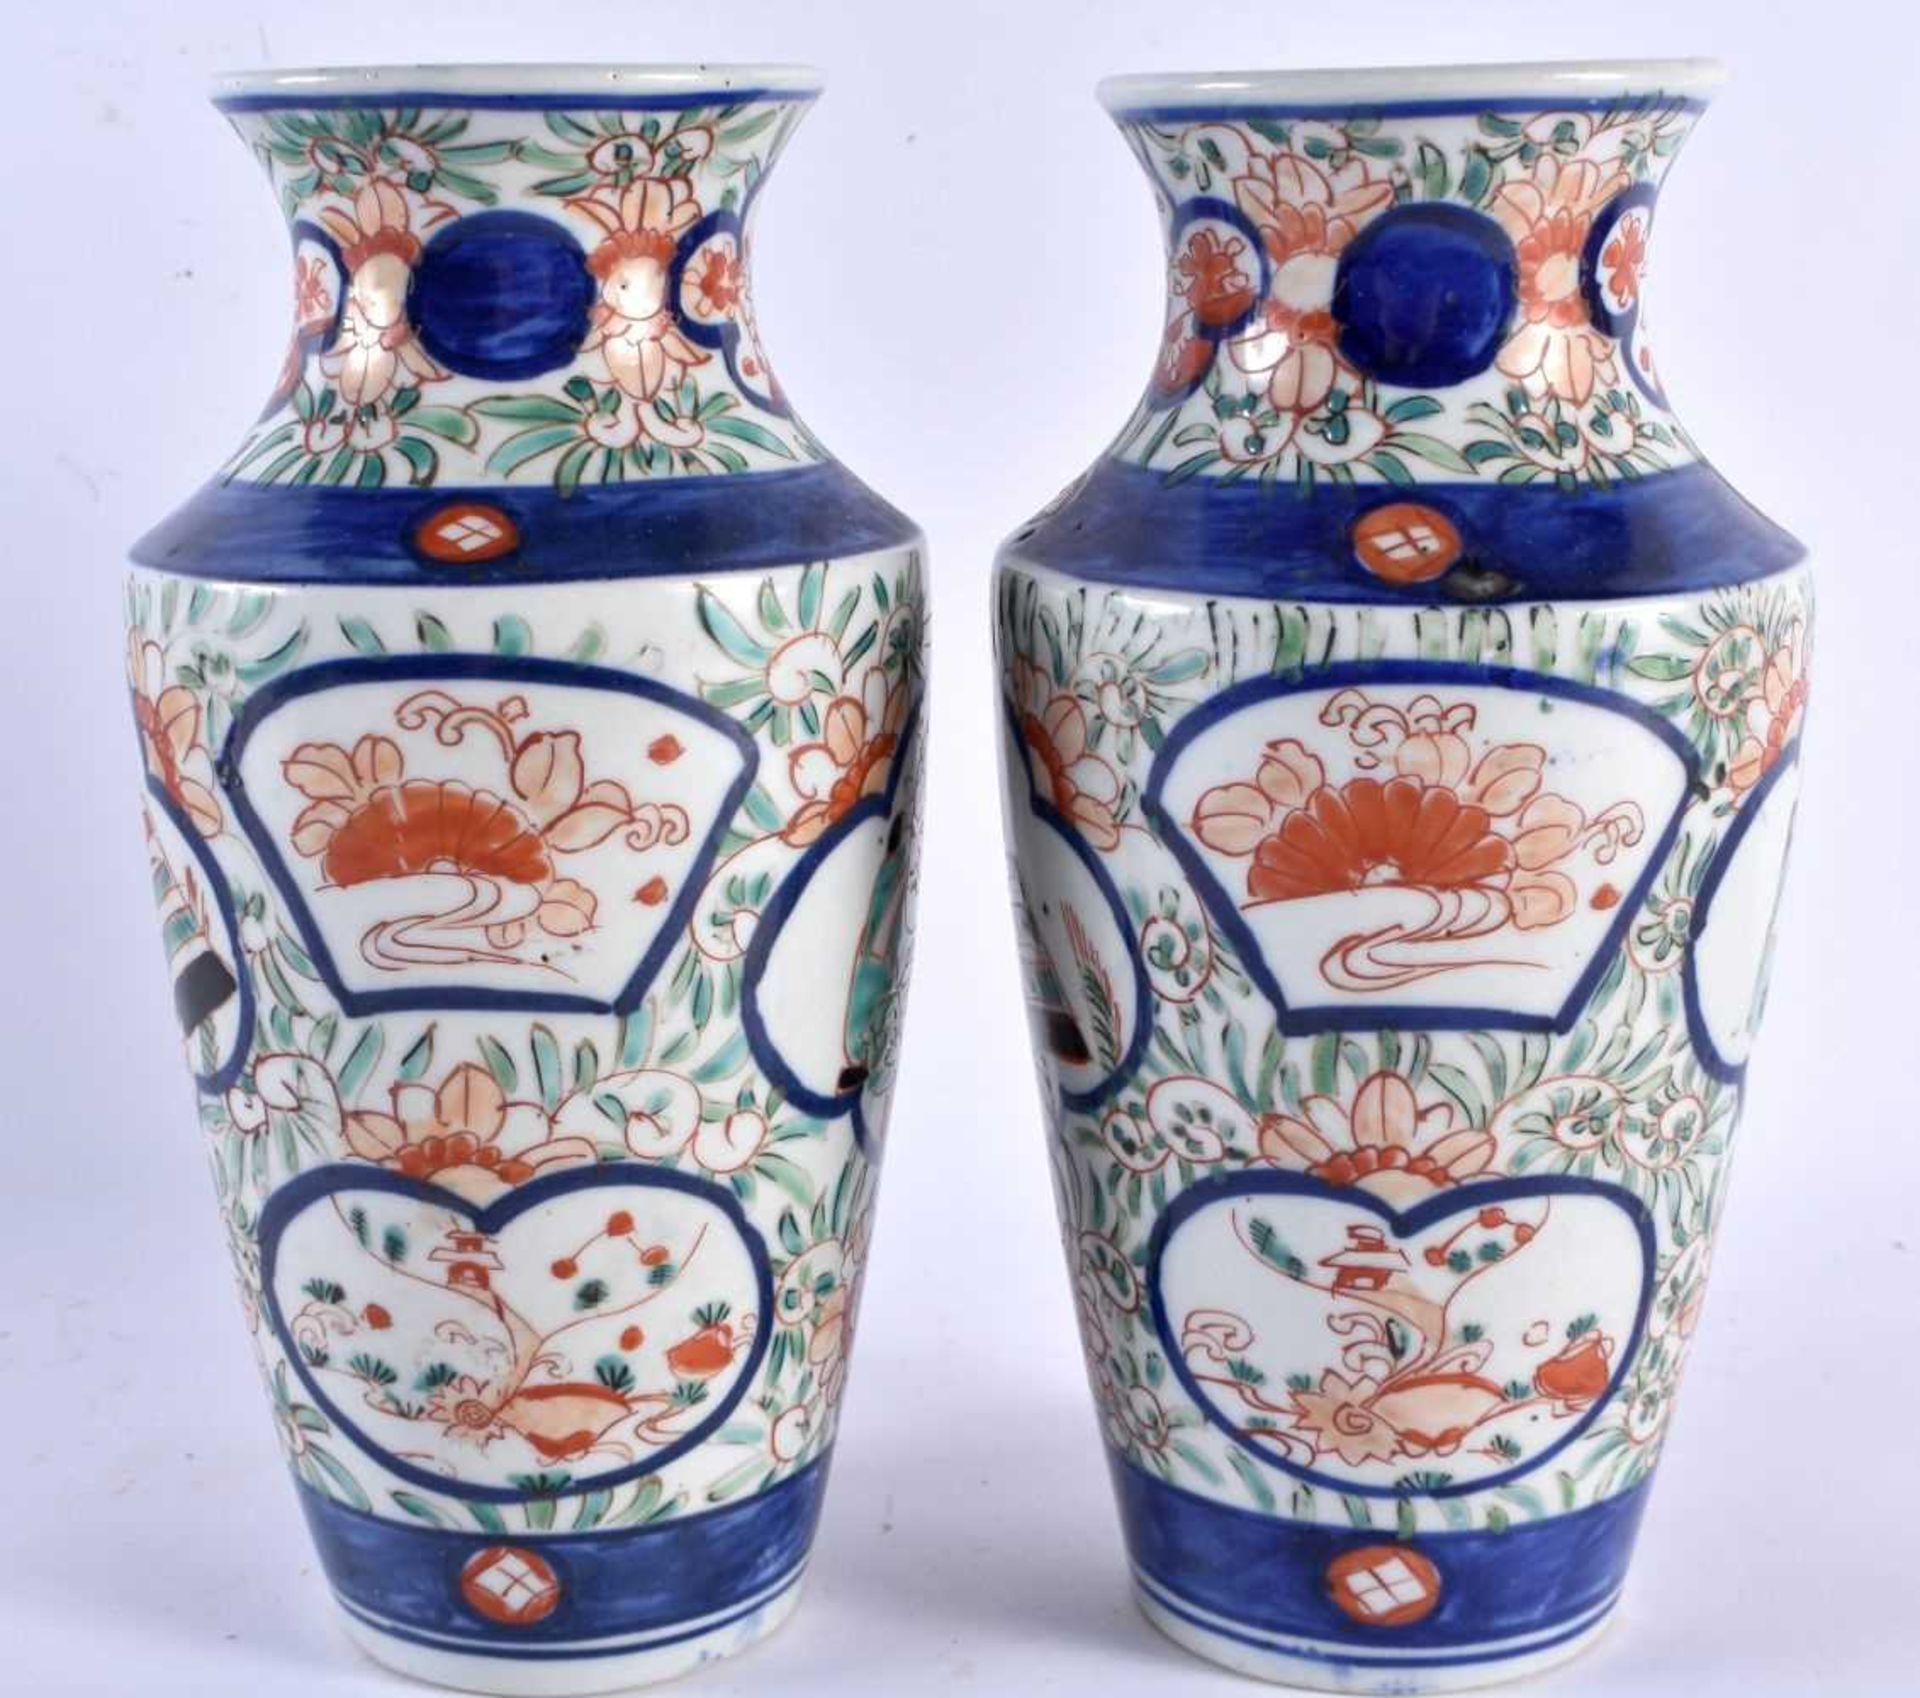 A PAIR OF 19TH CENTURY JAPANESE MEIJI PERIOD IMARI VASE painted with figures and foliage. 21 cm - Image 2 of 5